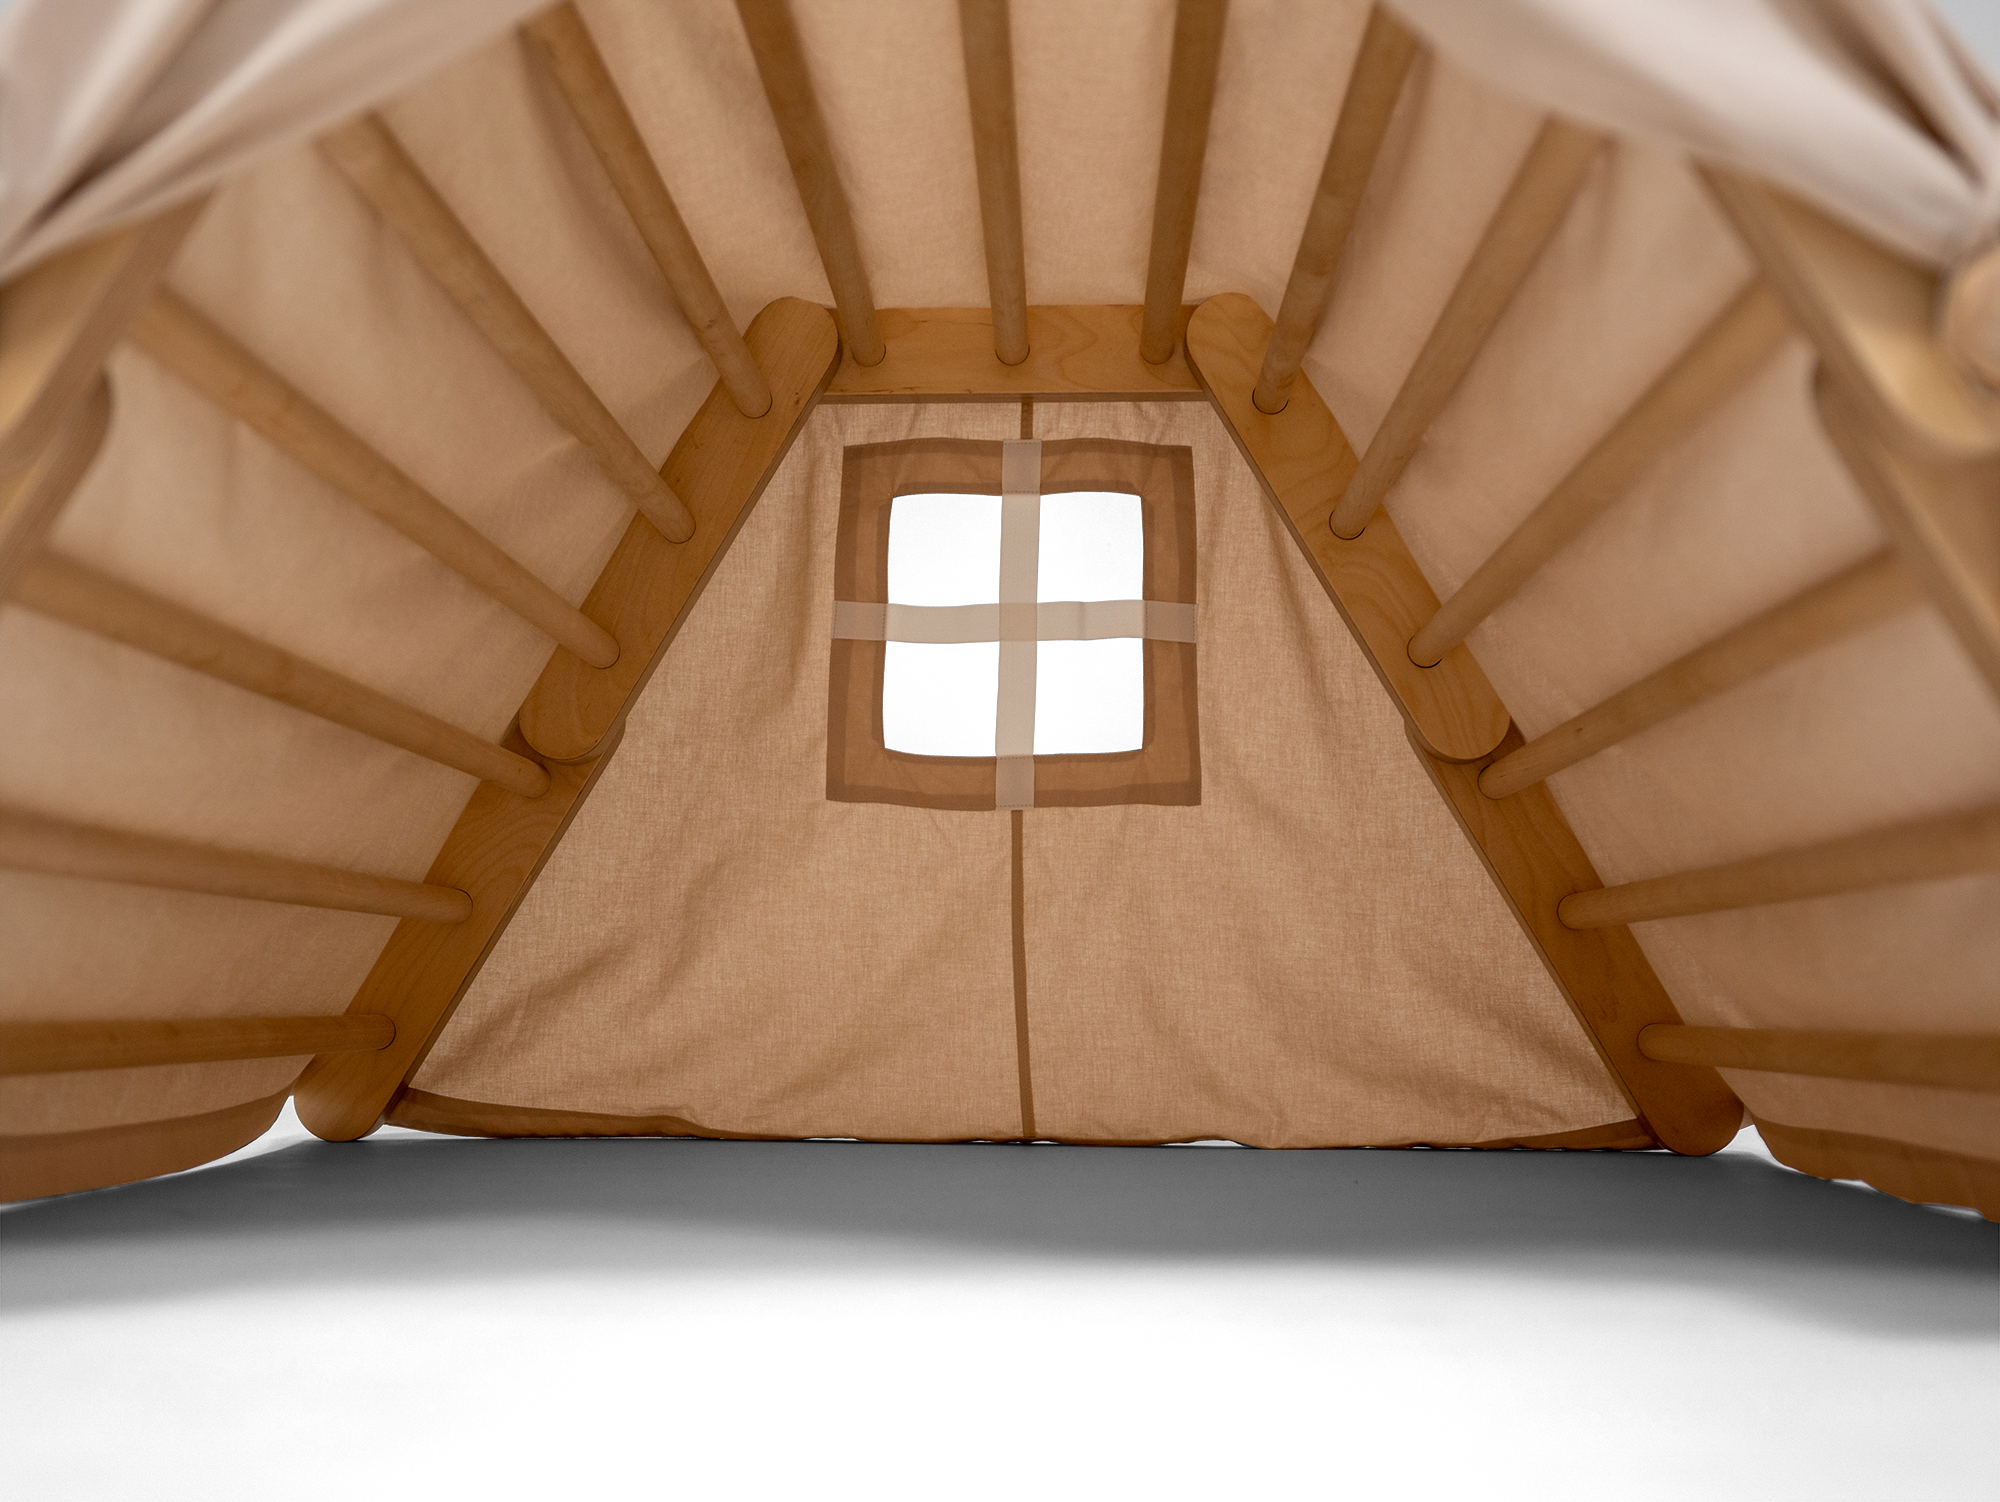 Play tent for climbing frame "Fipitri"